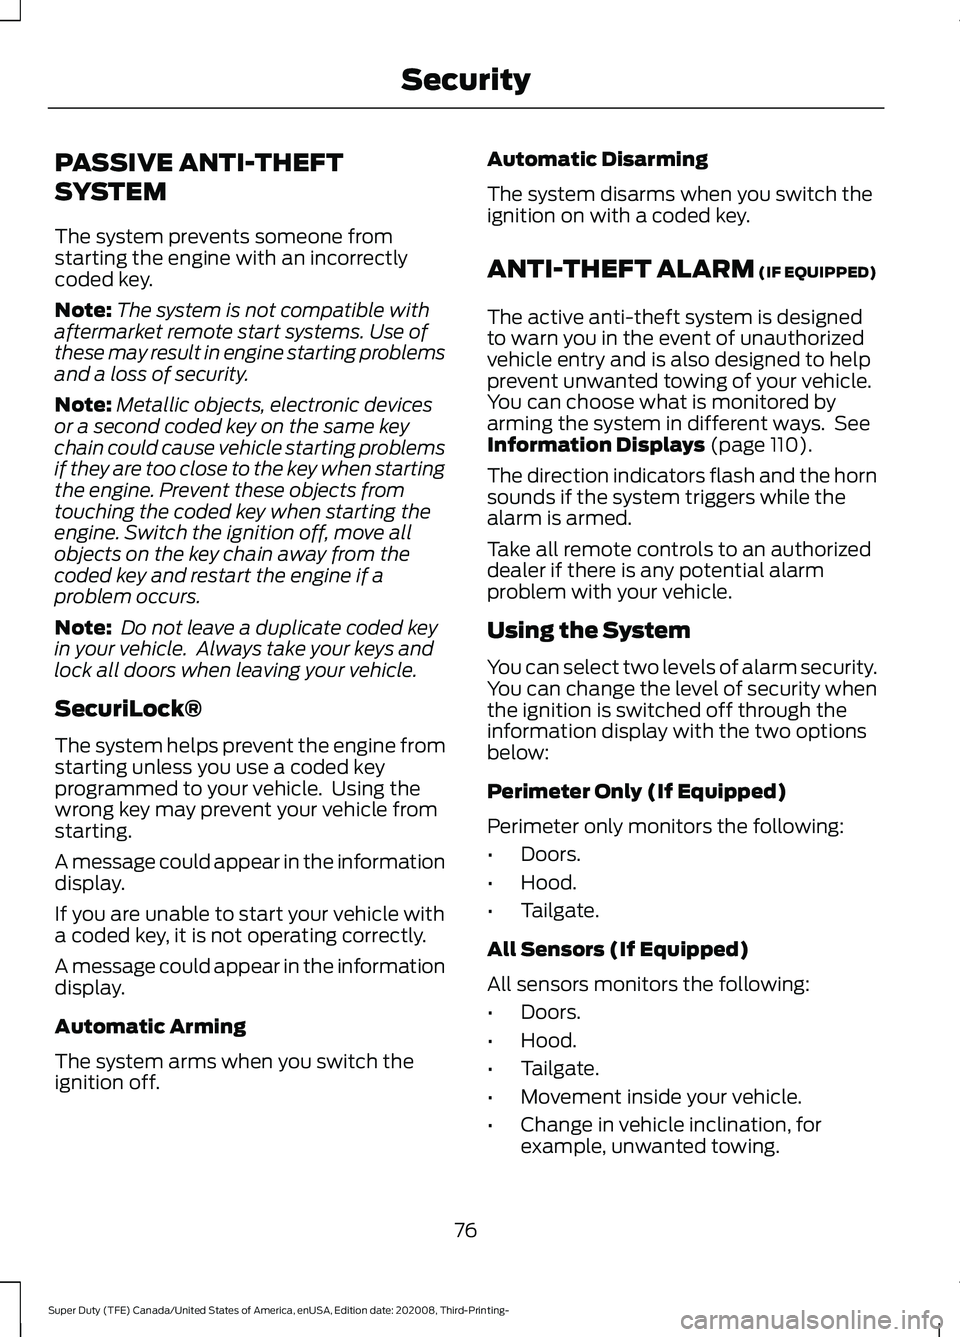 FORD F-450 2021  Owners Manual PASSIVE ANTI-THEFT
SYSTEM
The system prevents someone from
starting the engine with an incorrectly
coded key.
Note:
The system is not compatible with
aftermarket remote start systems. Use of
these may